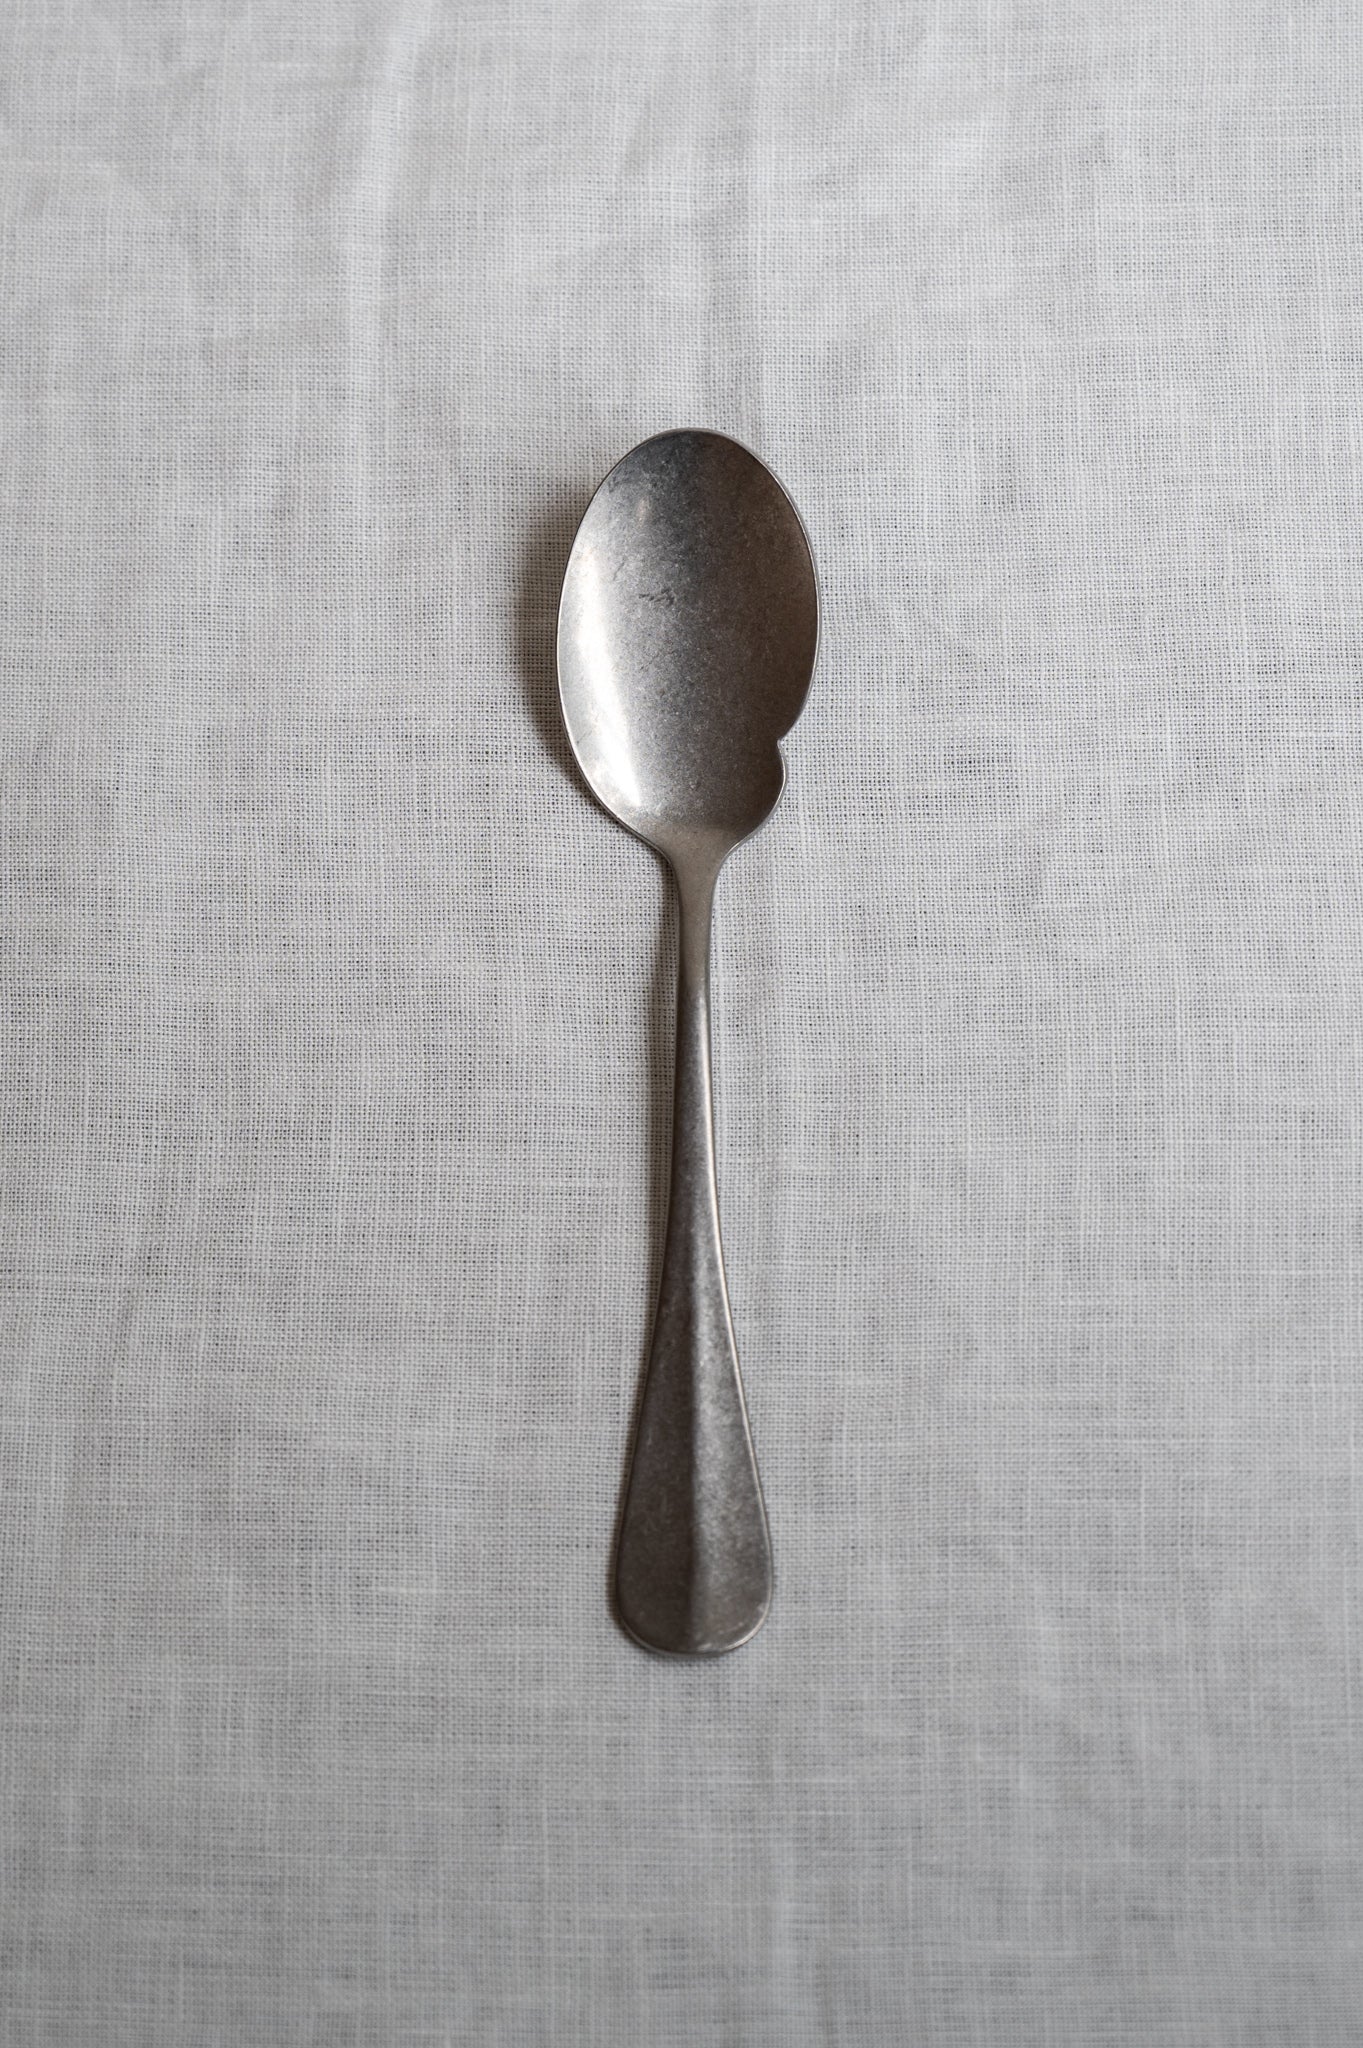 French Sauce Spoon from the Baguette Vintage Serving Cutlery collection by Sambonet.